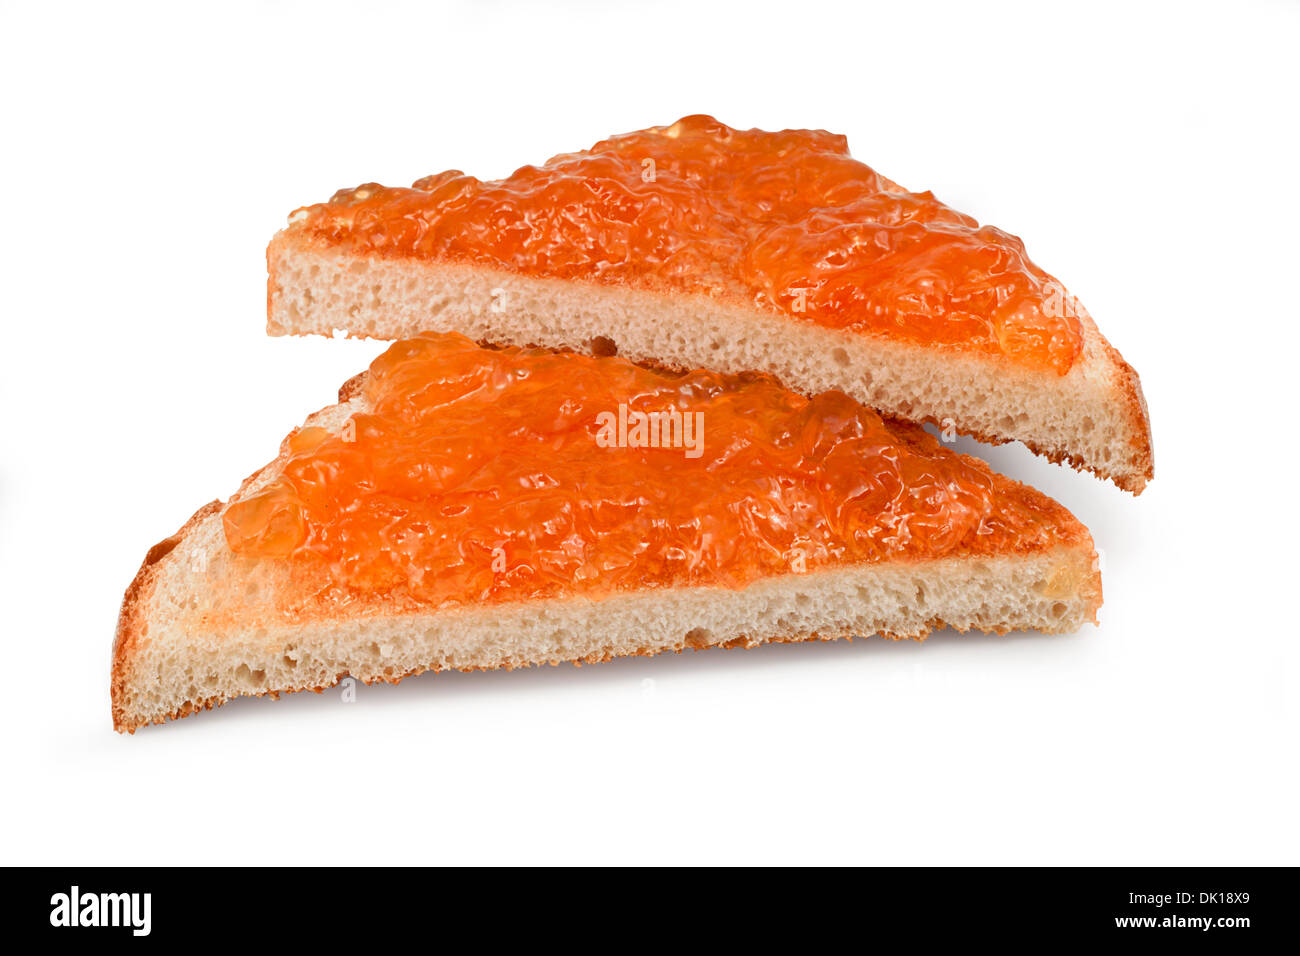 Marmalade on toast isolated against a white background Stock Photo